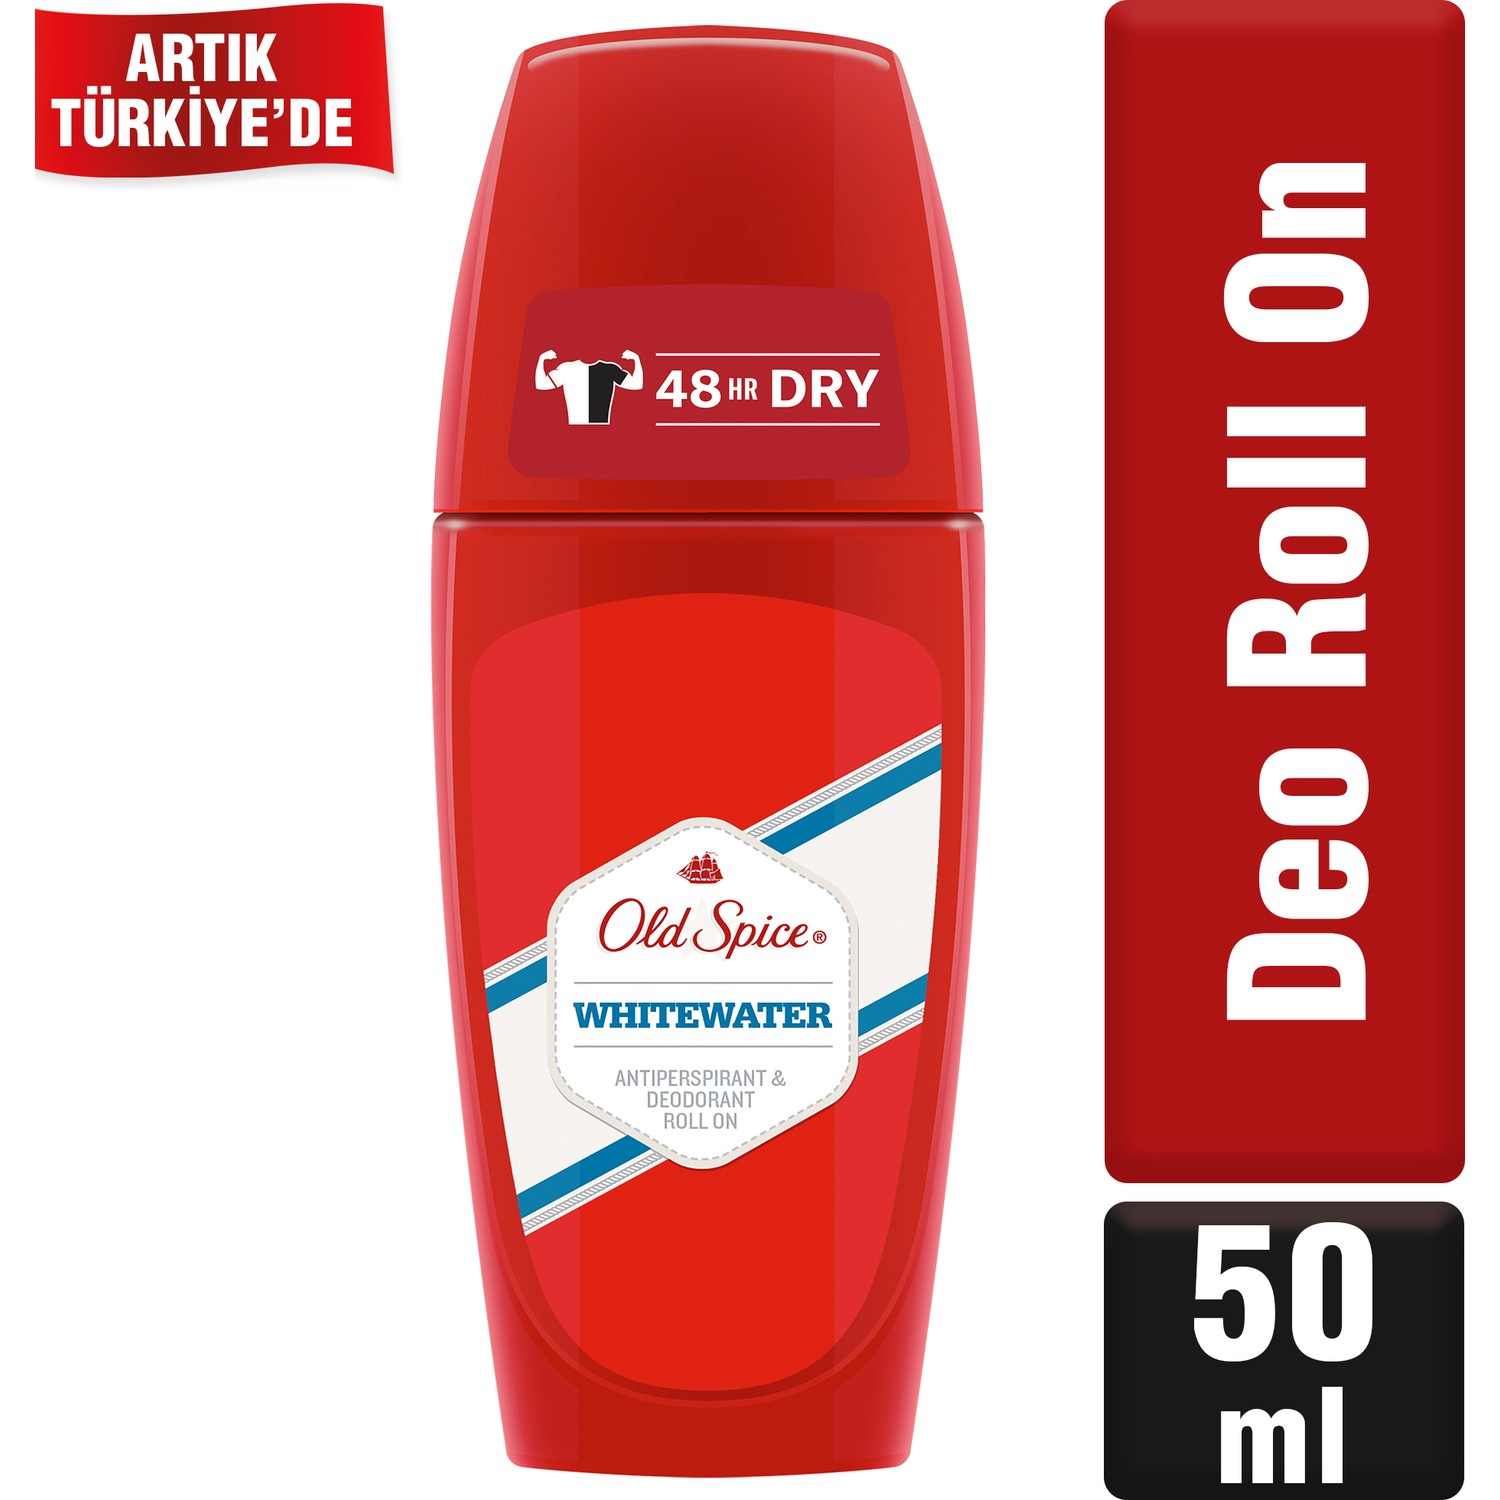 Old Spice Roll On Deodorant 50 ml Whitewater